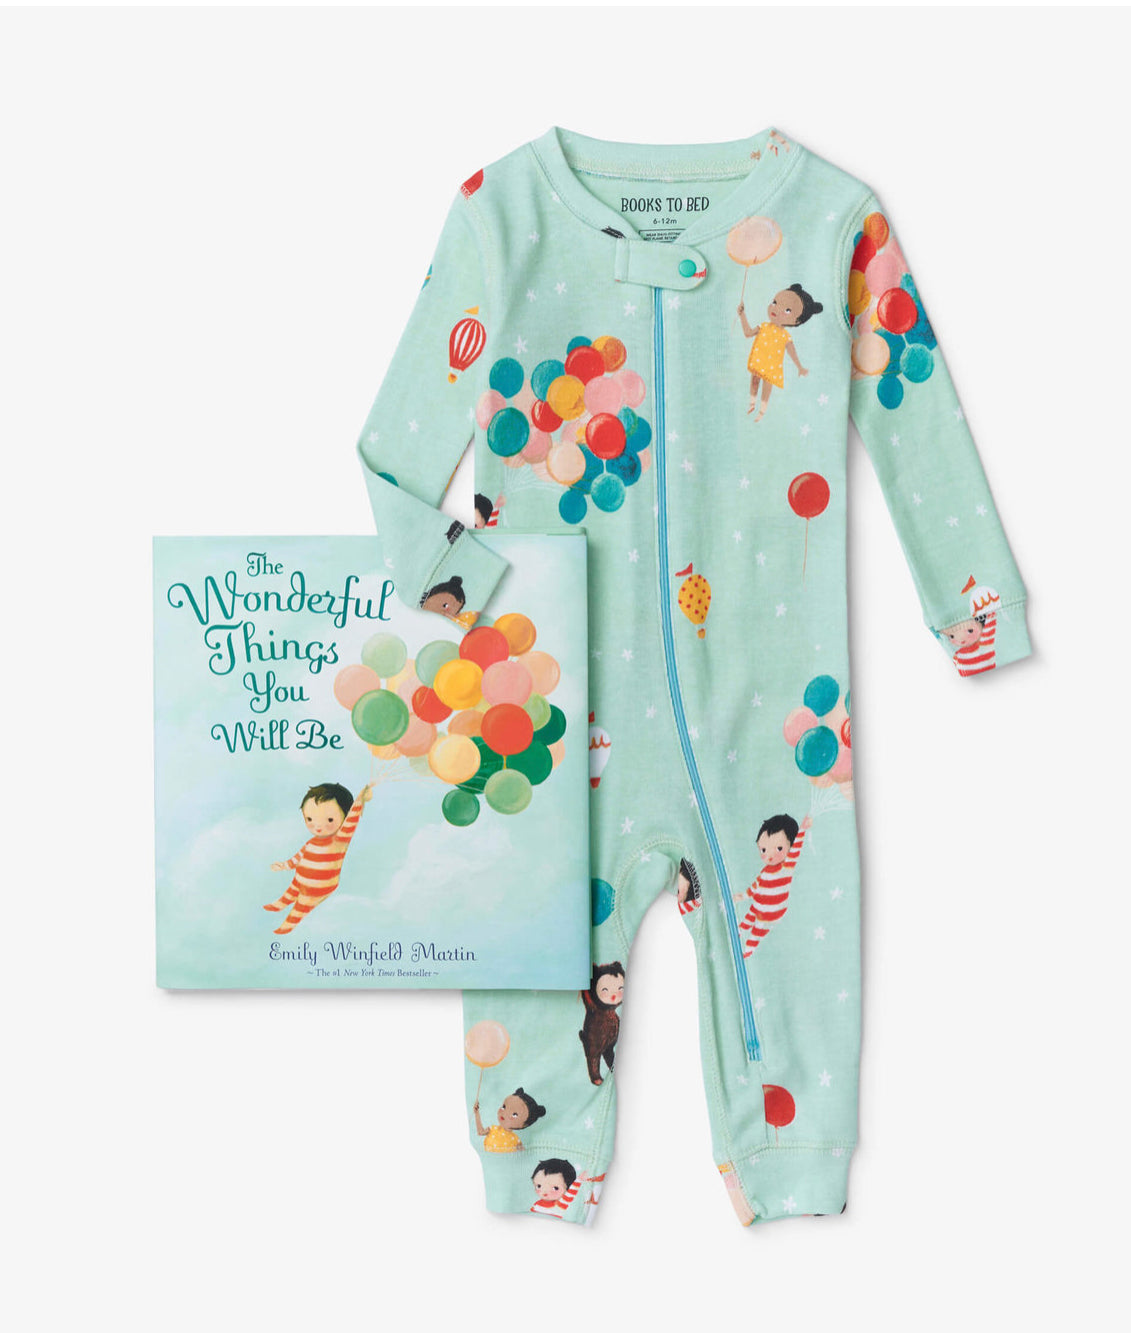 The Wonderful Things You Will Be Pajamas & Book